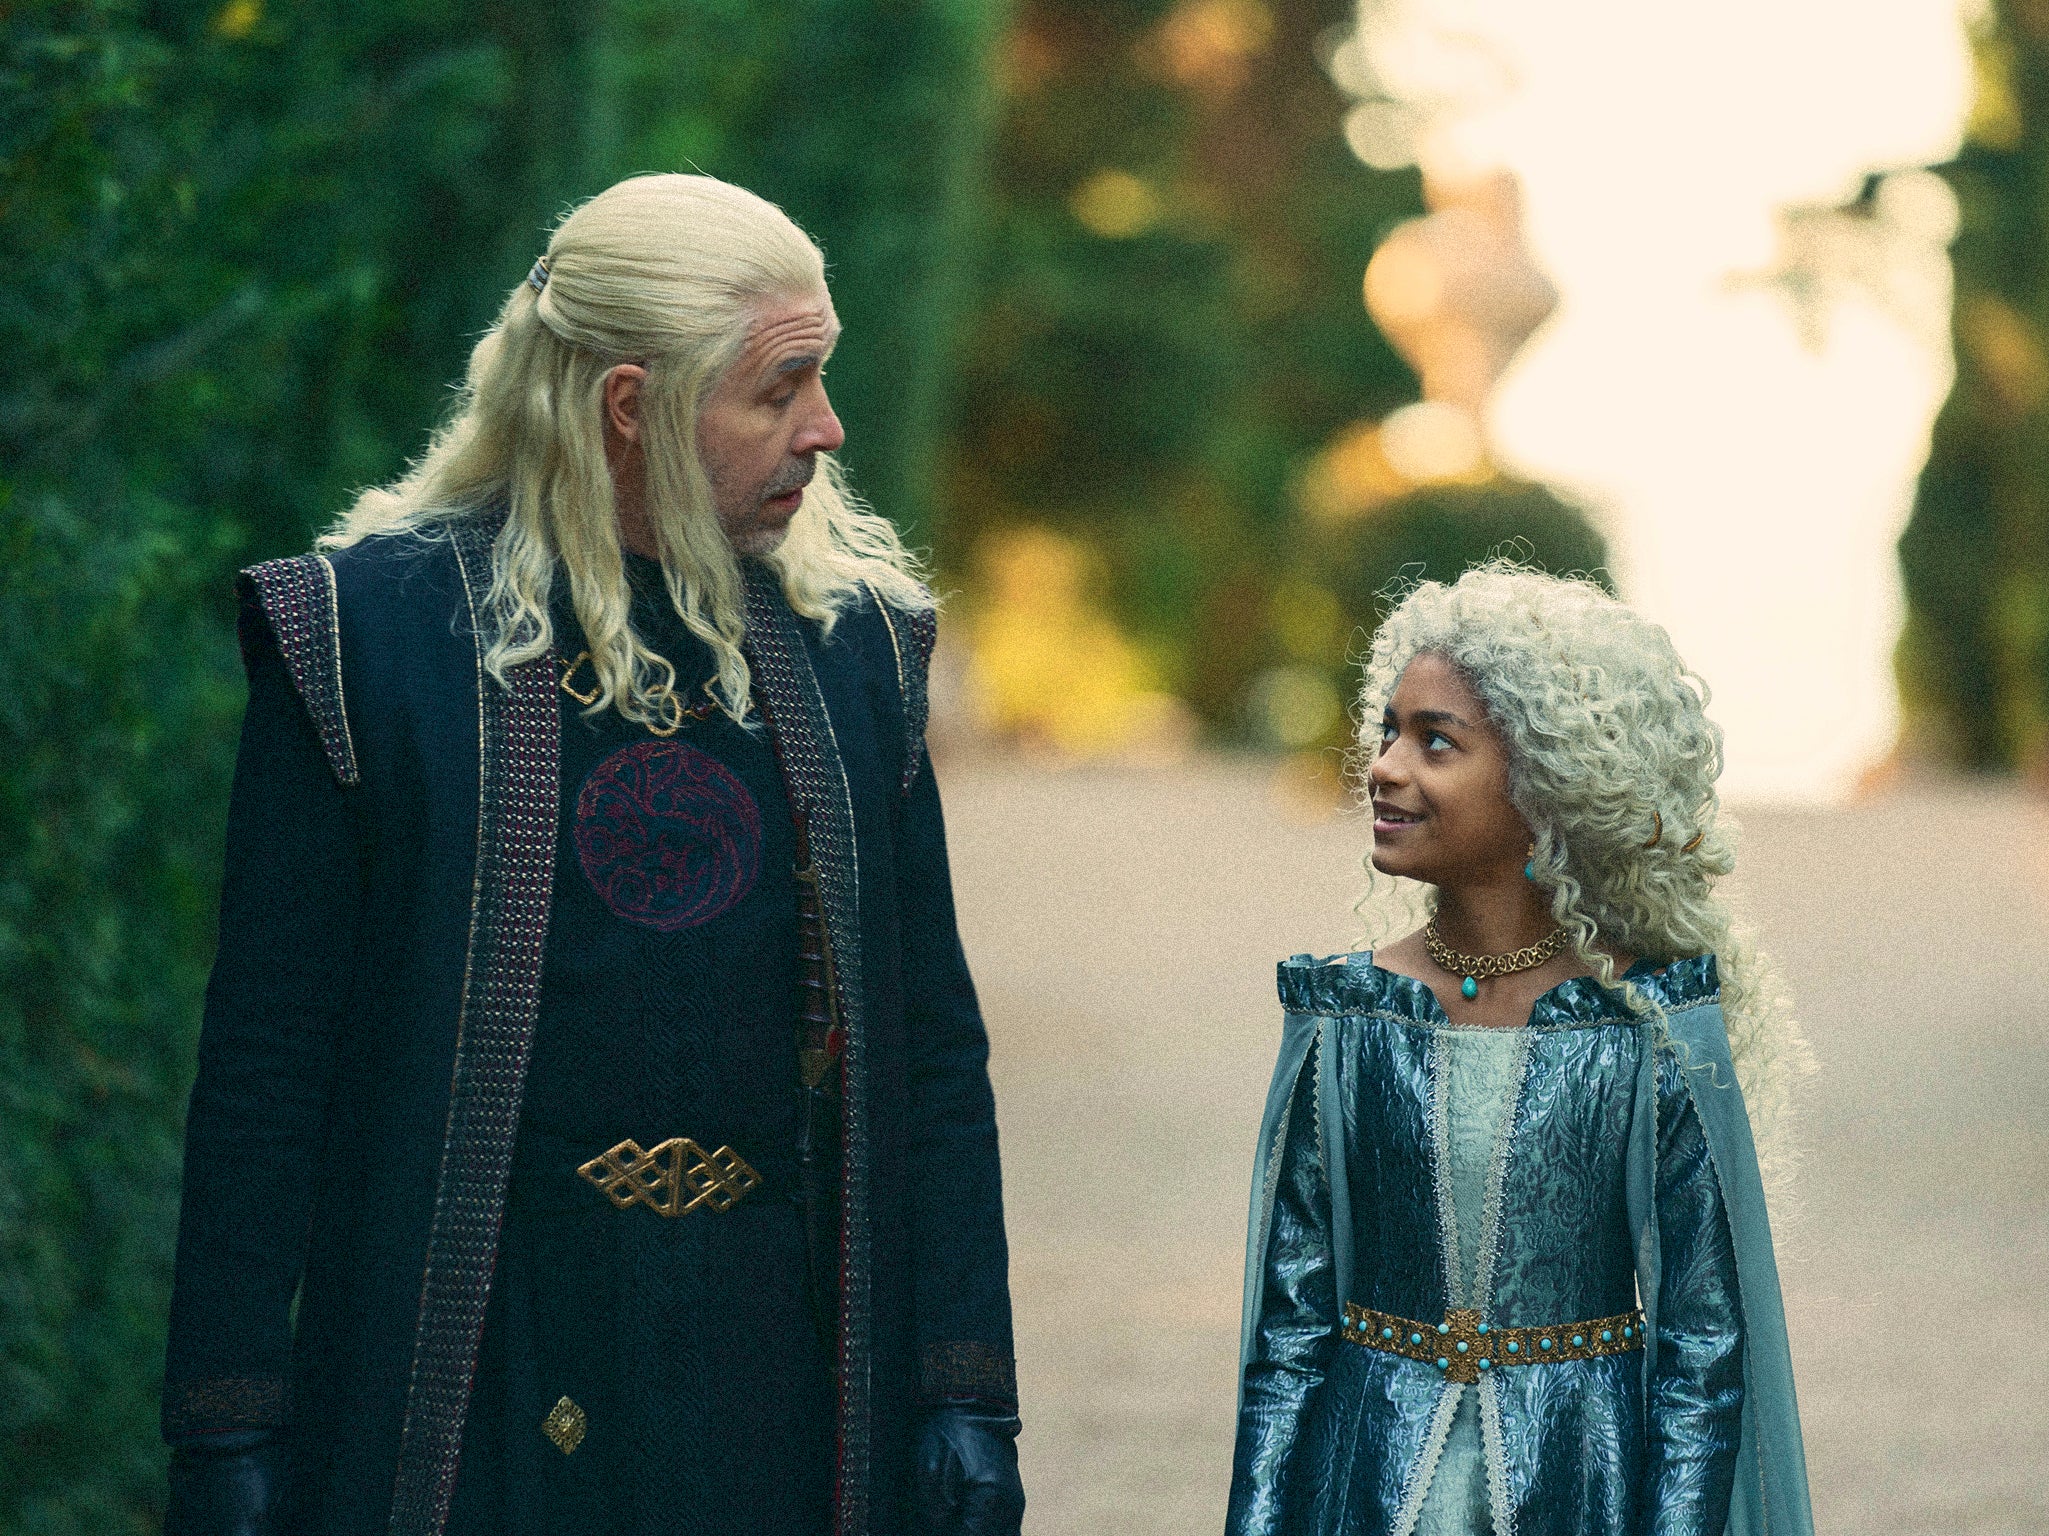 Paddy Considine and Nova Foueillis-Mosé as Viserys and Laena in ‘House of the Dragon’